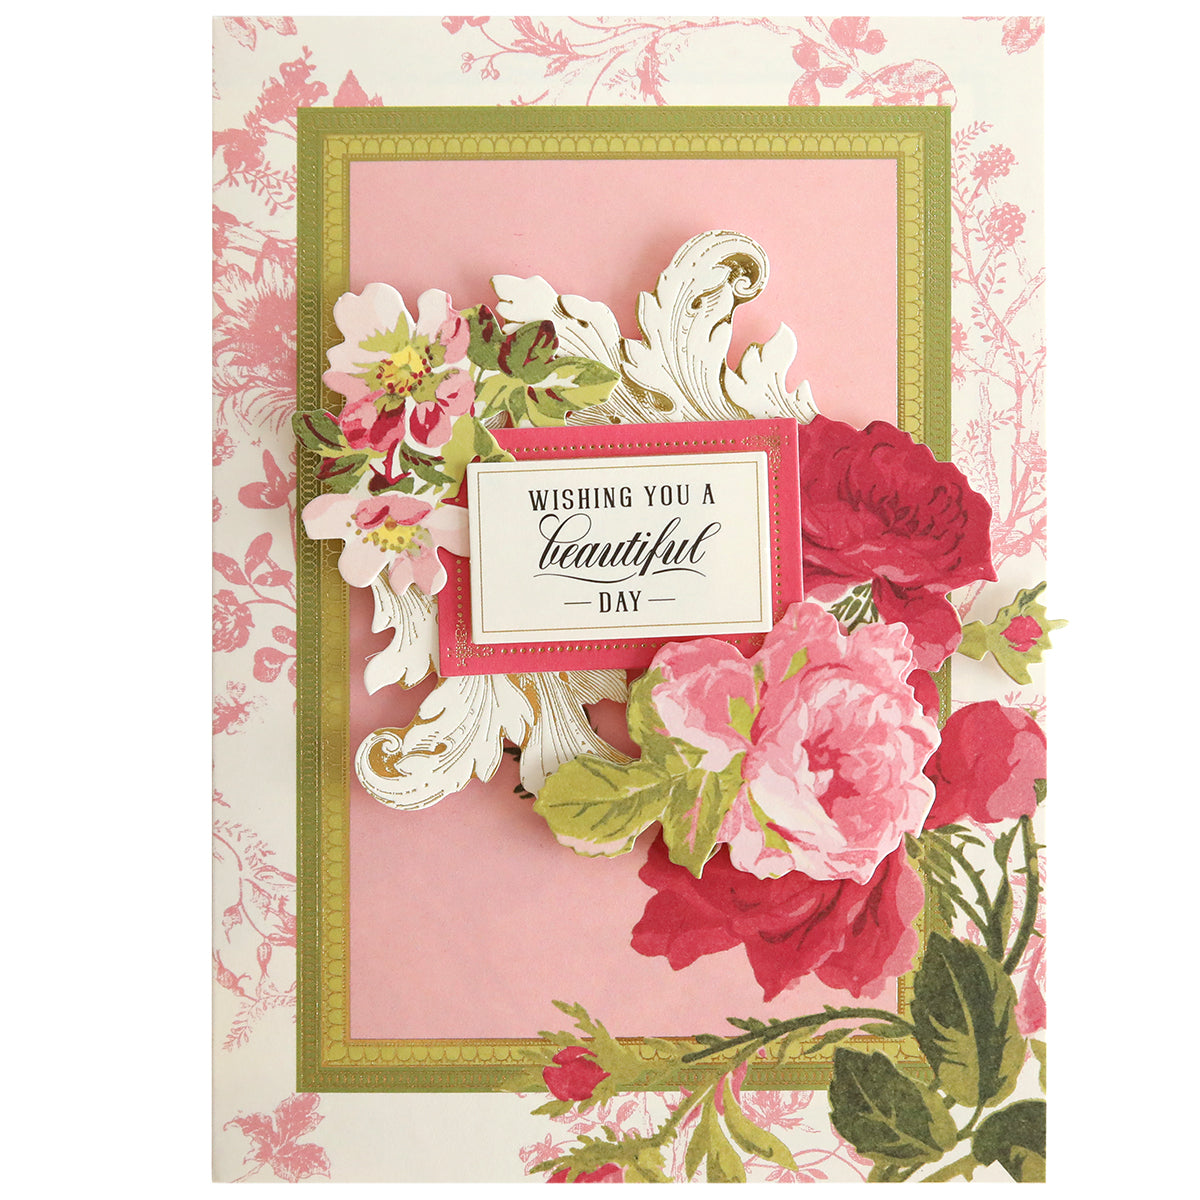 Greeting card featuring floral design with roses and a message "wishing you a beautiful day" framed by ornate white patterns on a pink background from the Folded Flower Birthday Card Kit.